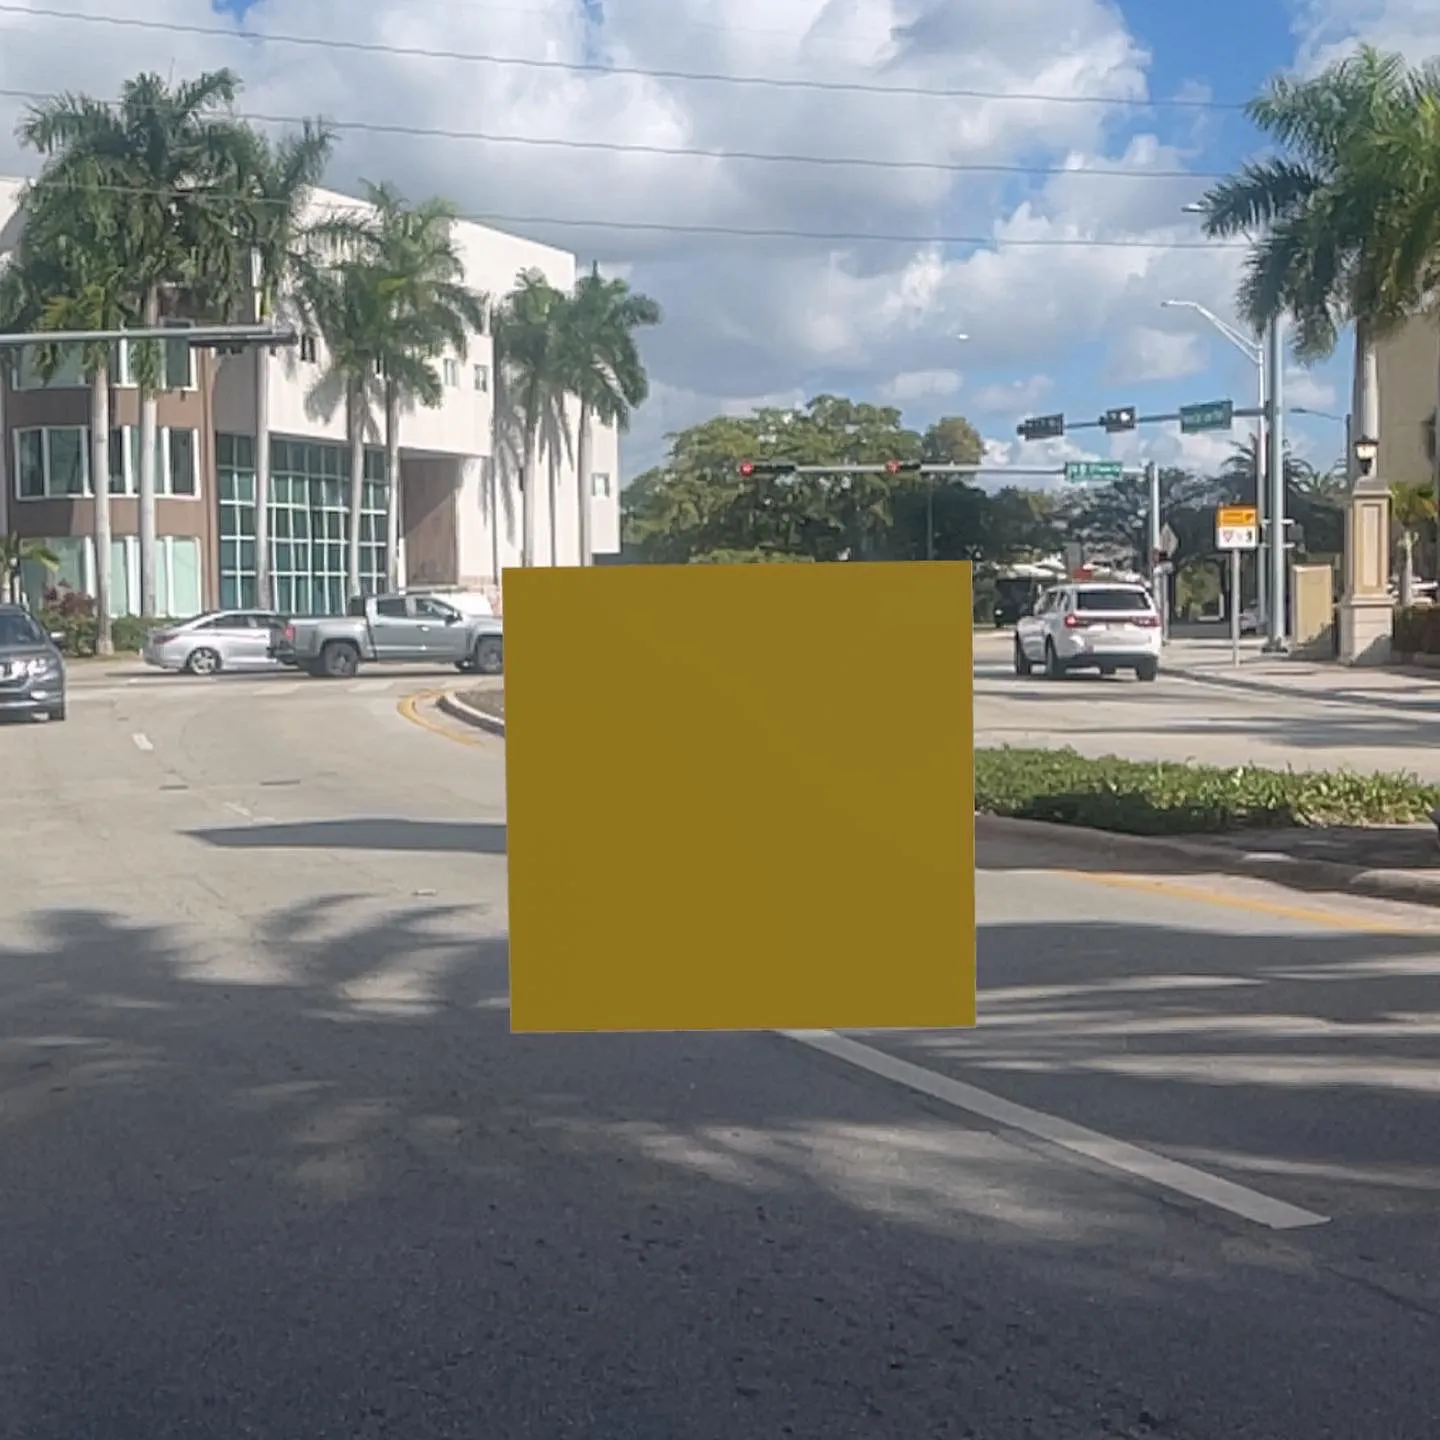 A yellow pixel, AR object positioned on a street